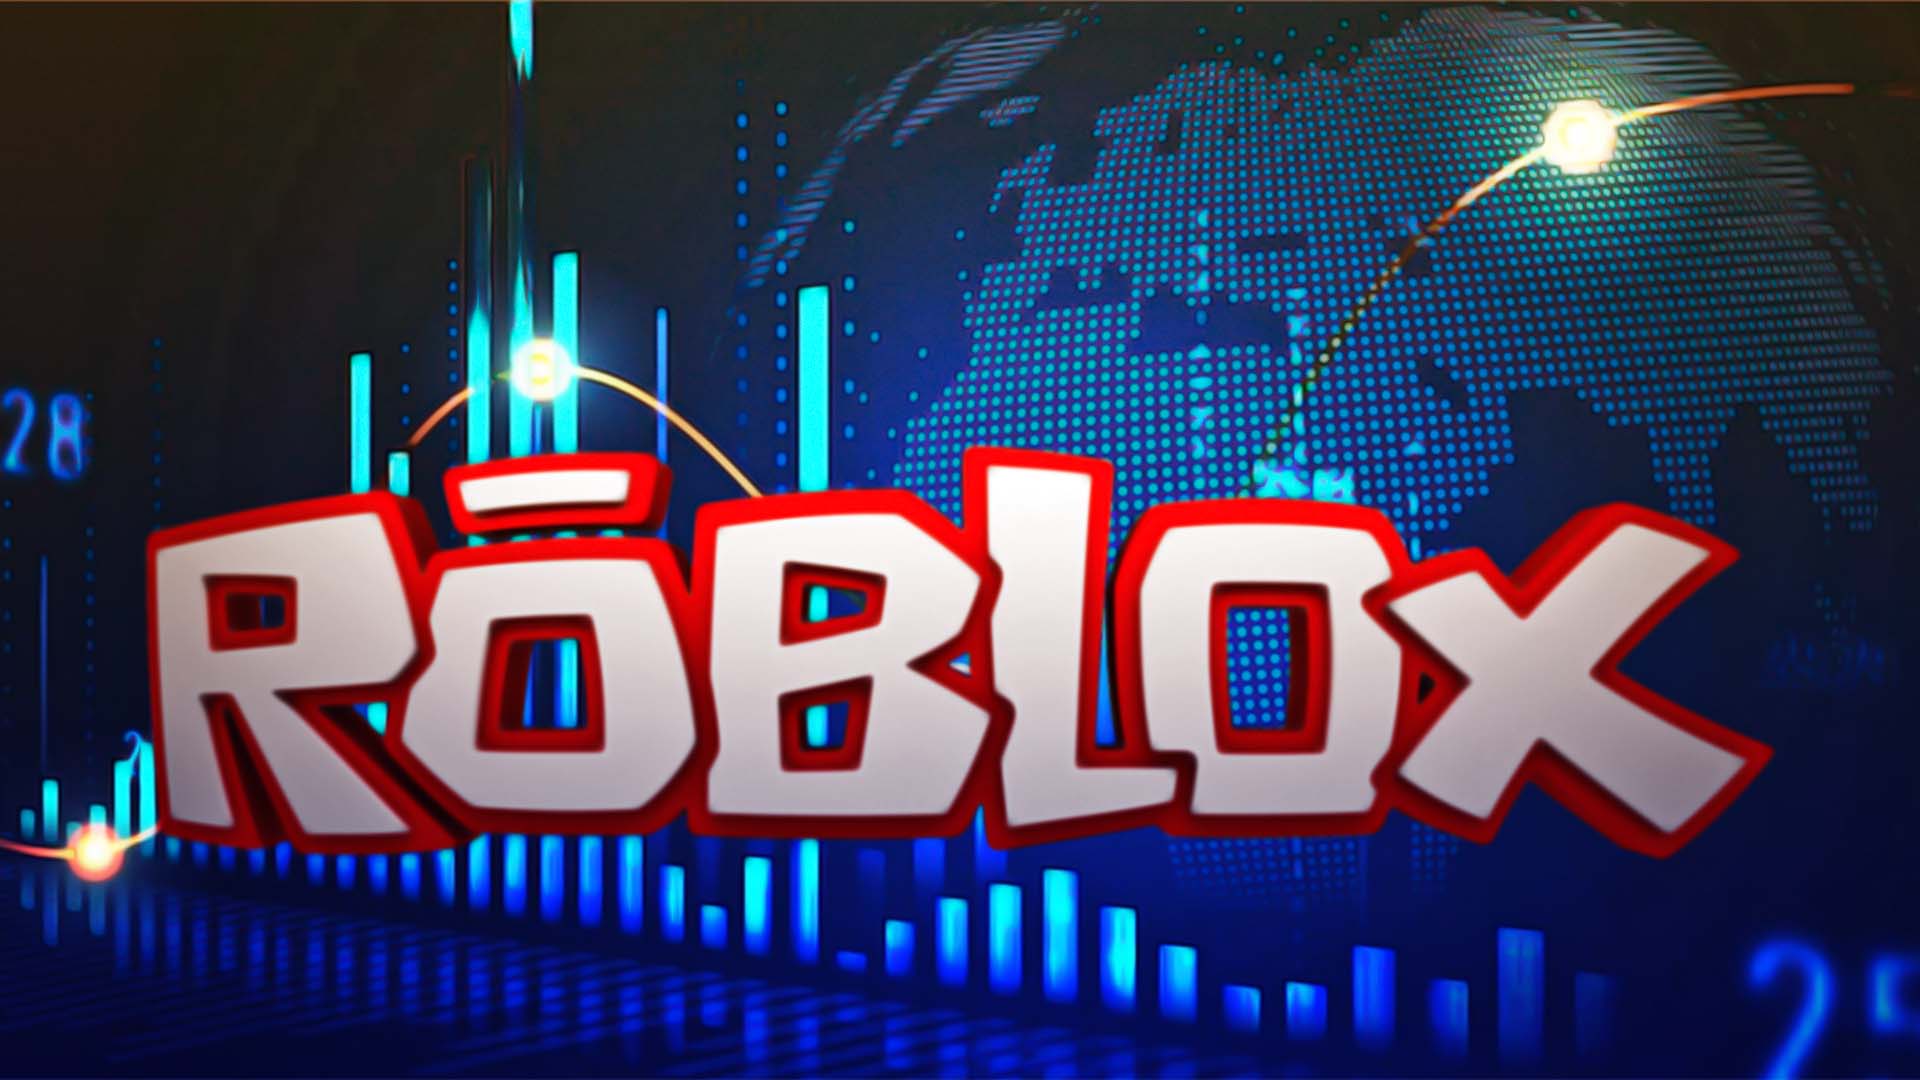 Roblox, a non-traditional game for adults is building a metaverse